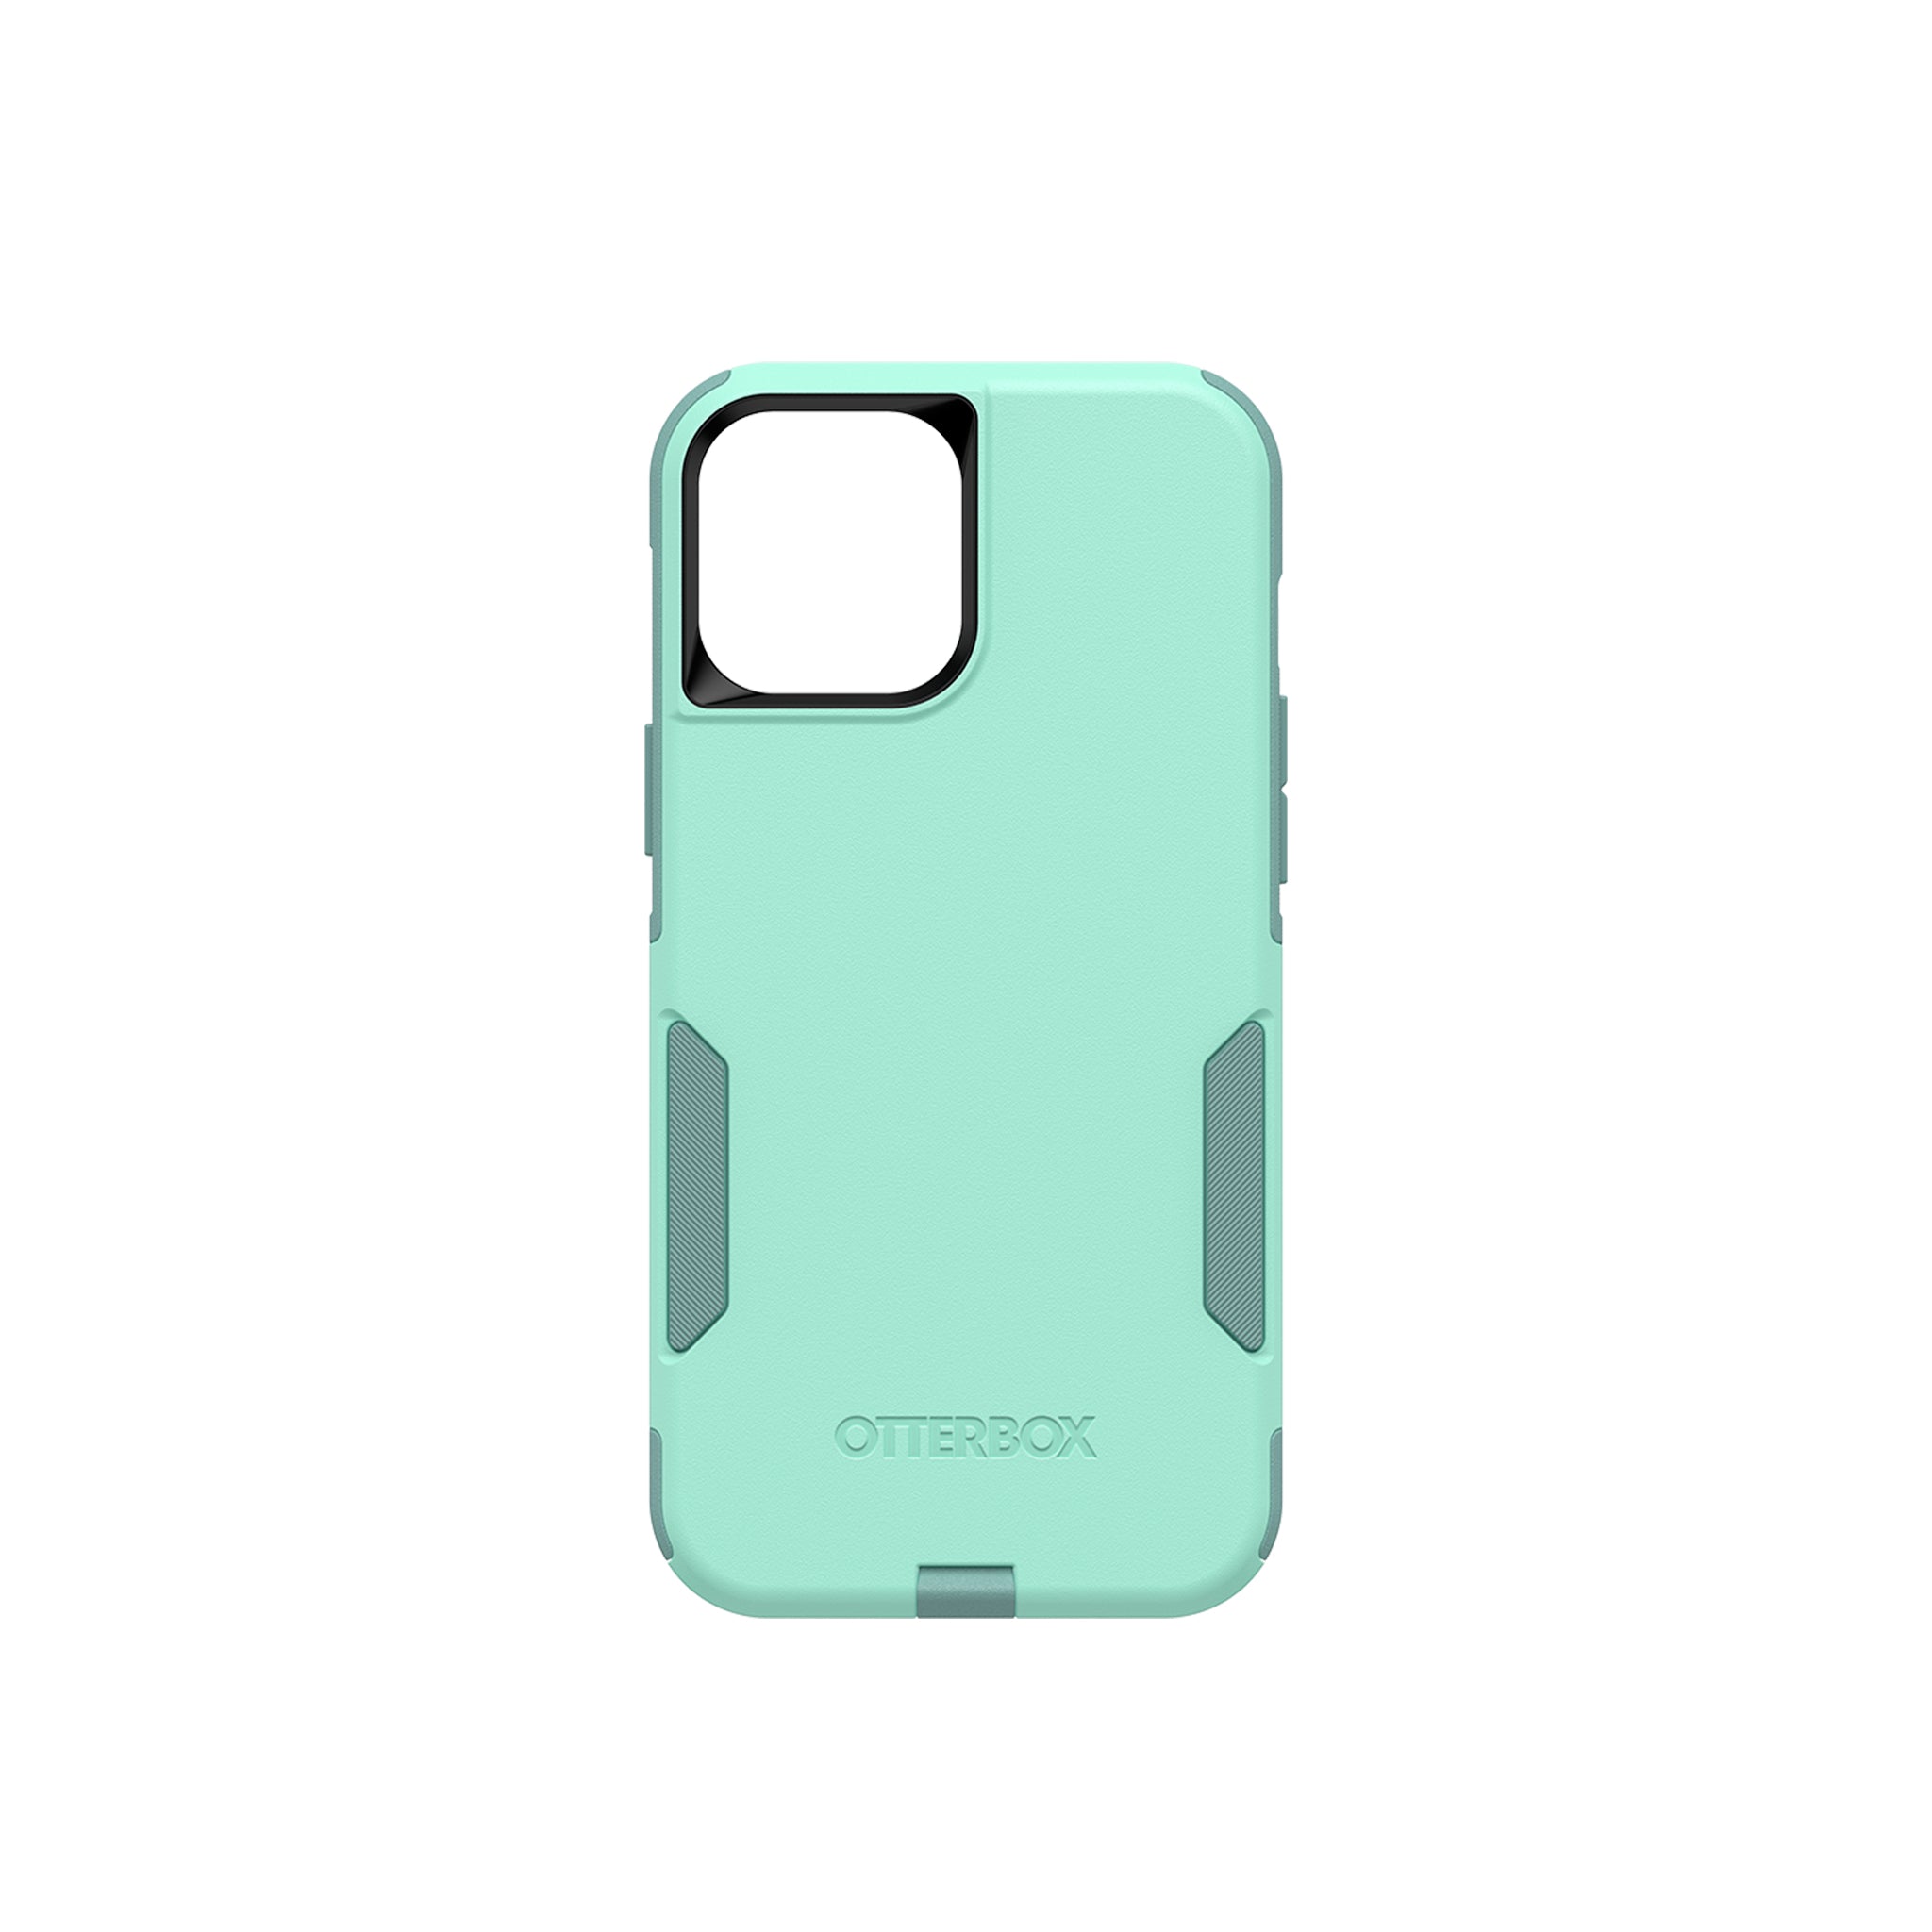 OtterBox - Commuter for iPhone 12 Pro Max - Ocean Way